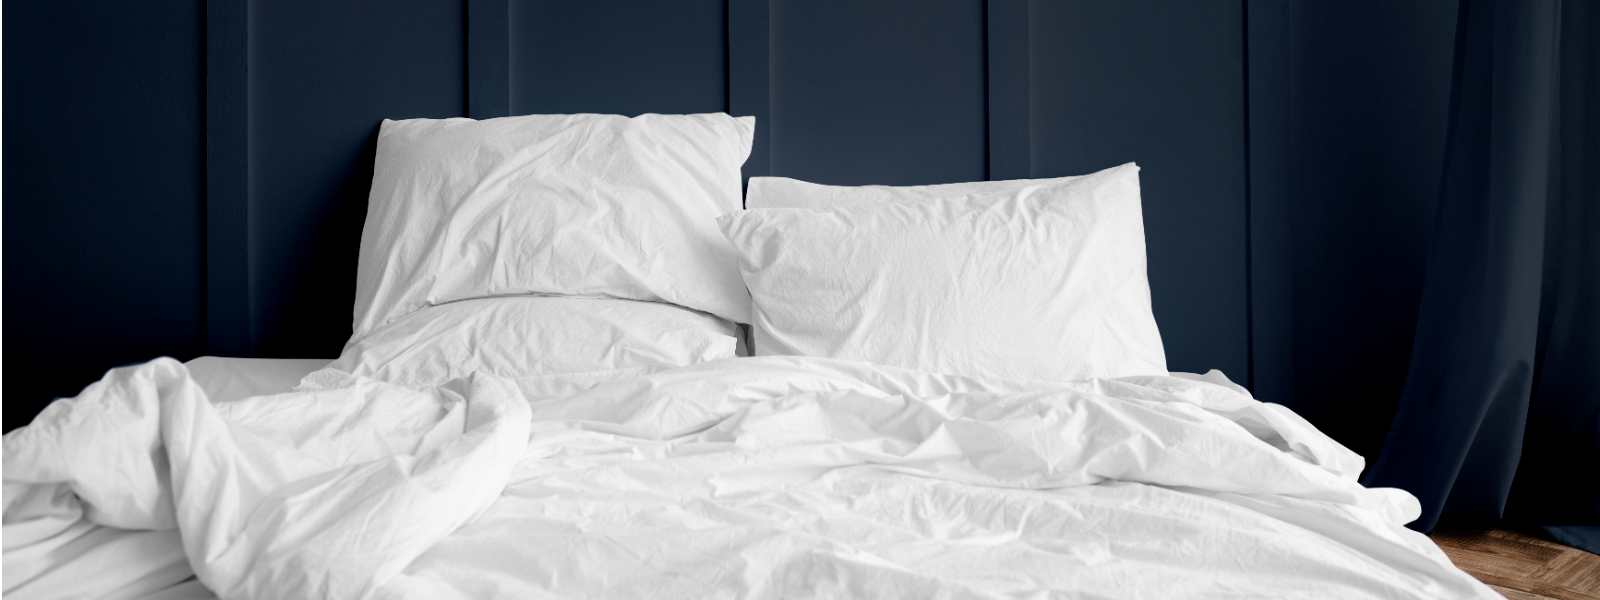 FURNICO OÜ - We specialize in providing a wide range of high-quality mattresses, bed accessories, and sleep solutions tai...